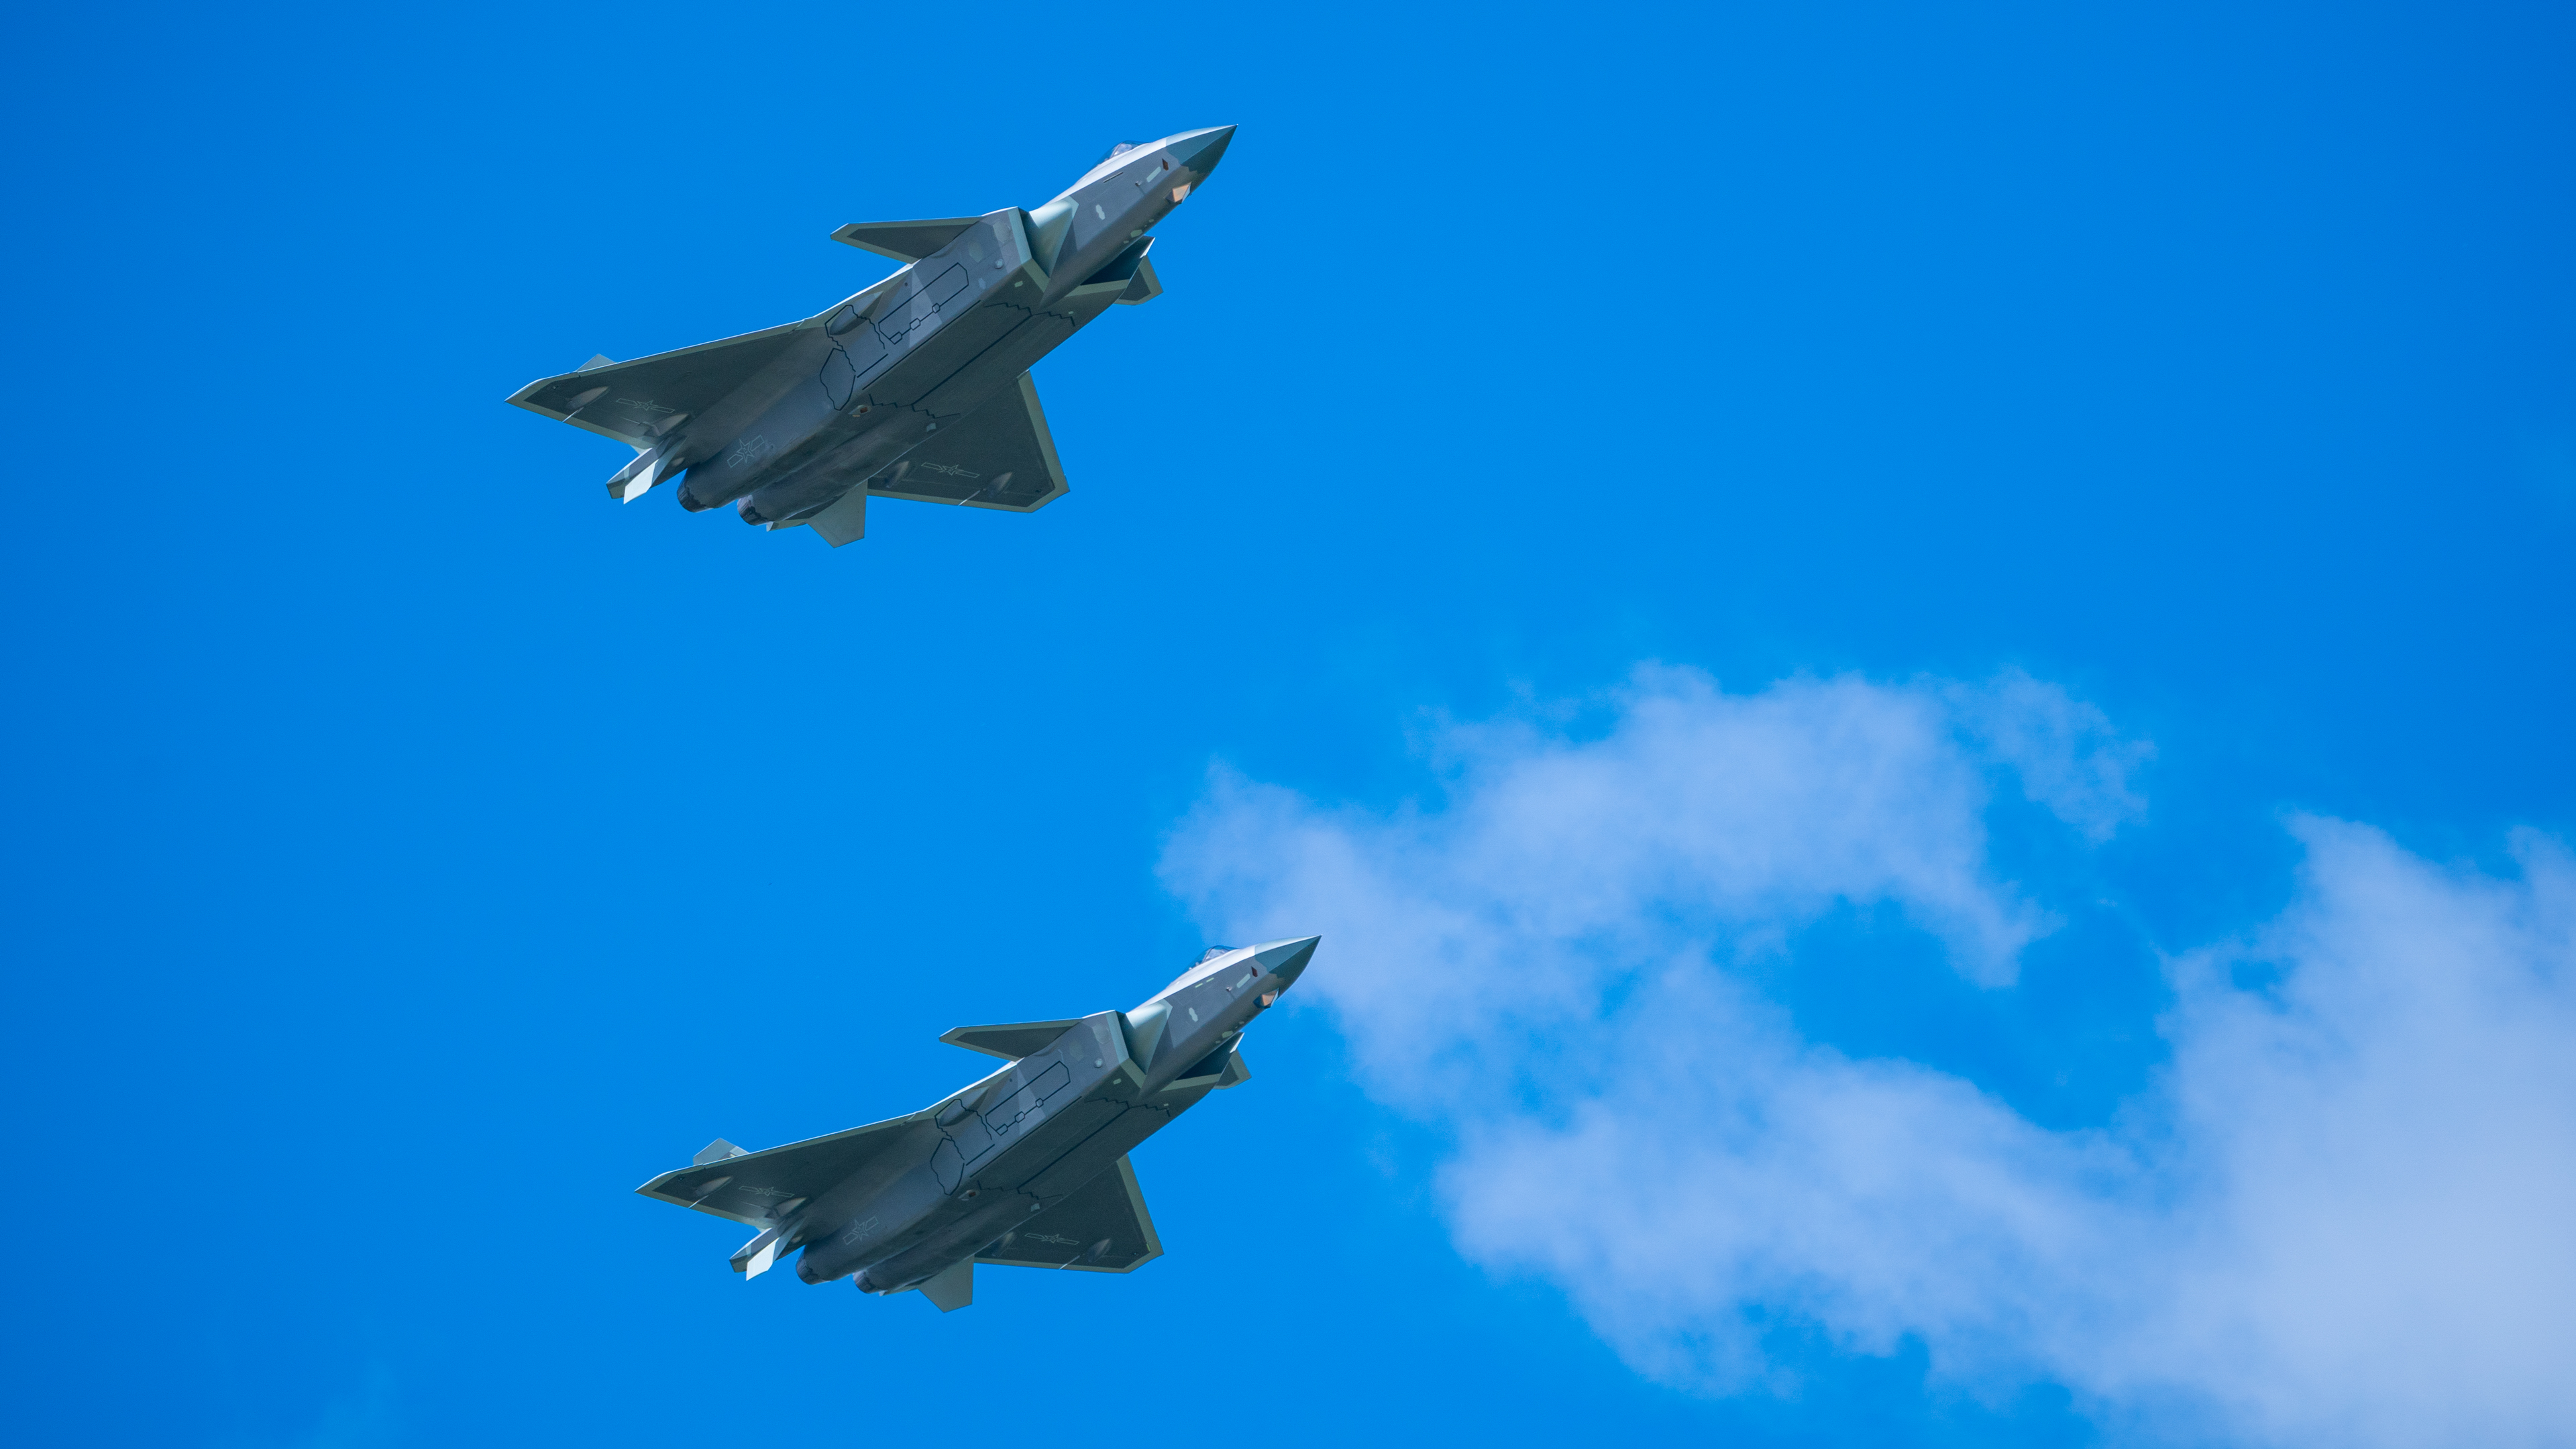 General 3840x2160 PLAAF military aircraft military vehicle clouds sky simple background minimalism flying Chengdu J-20